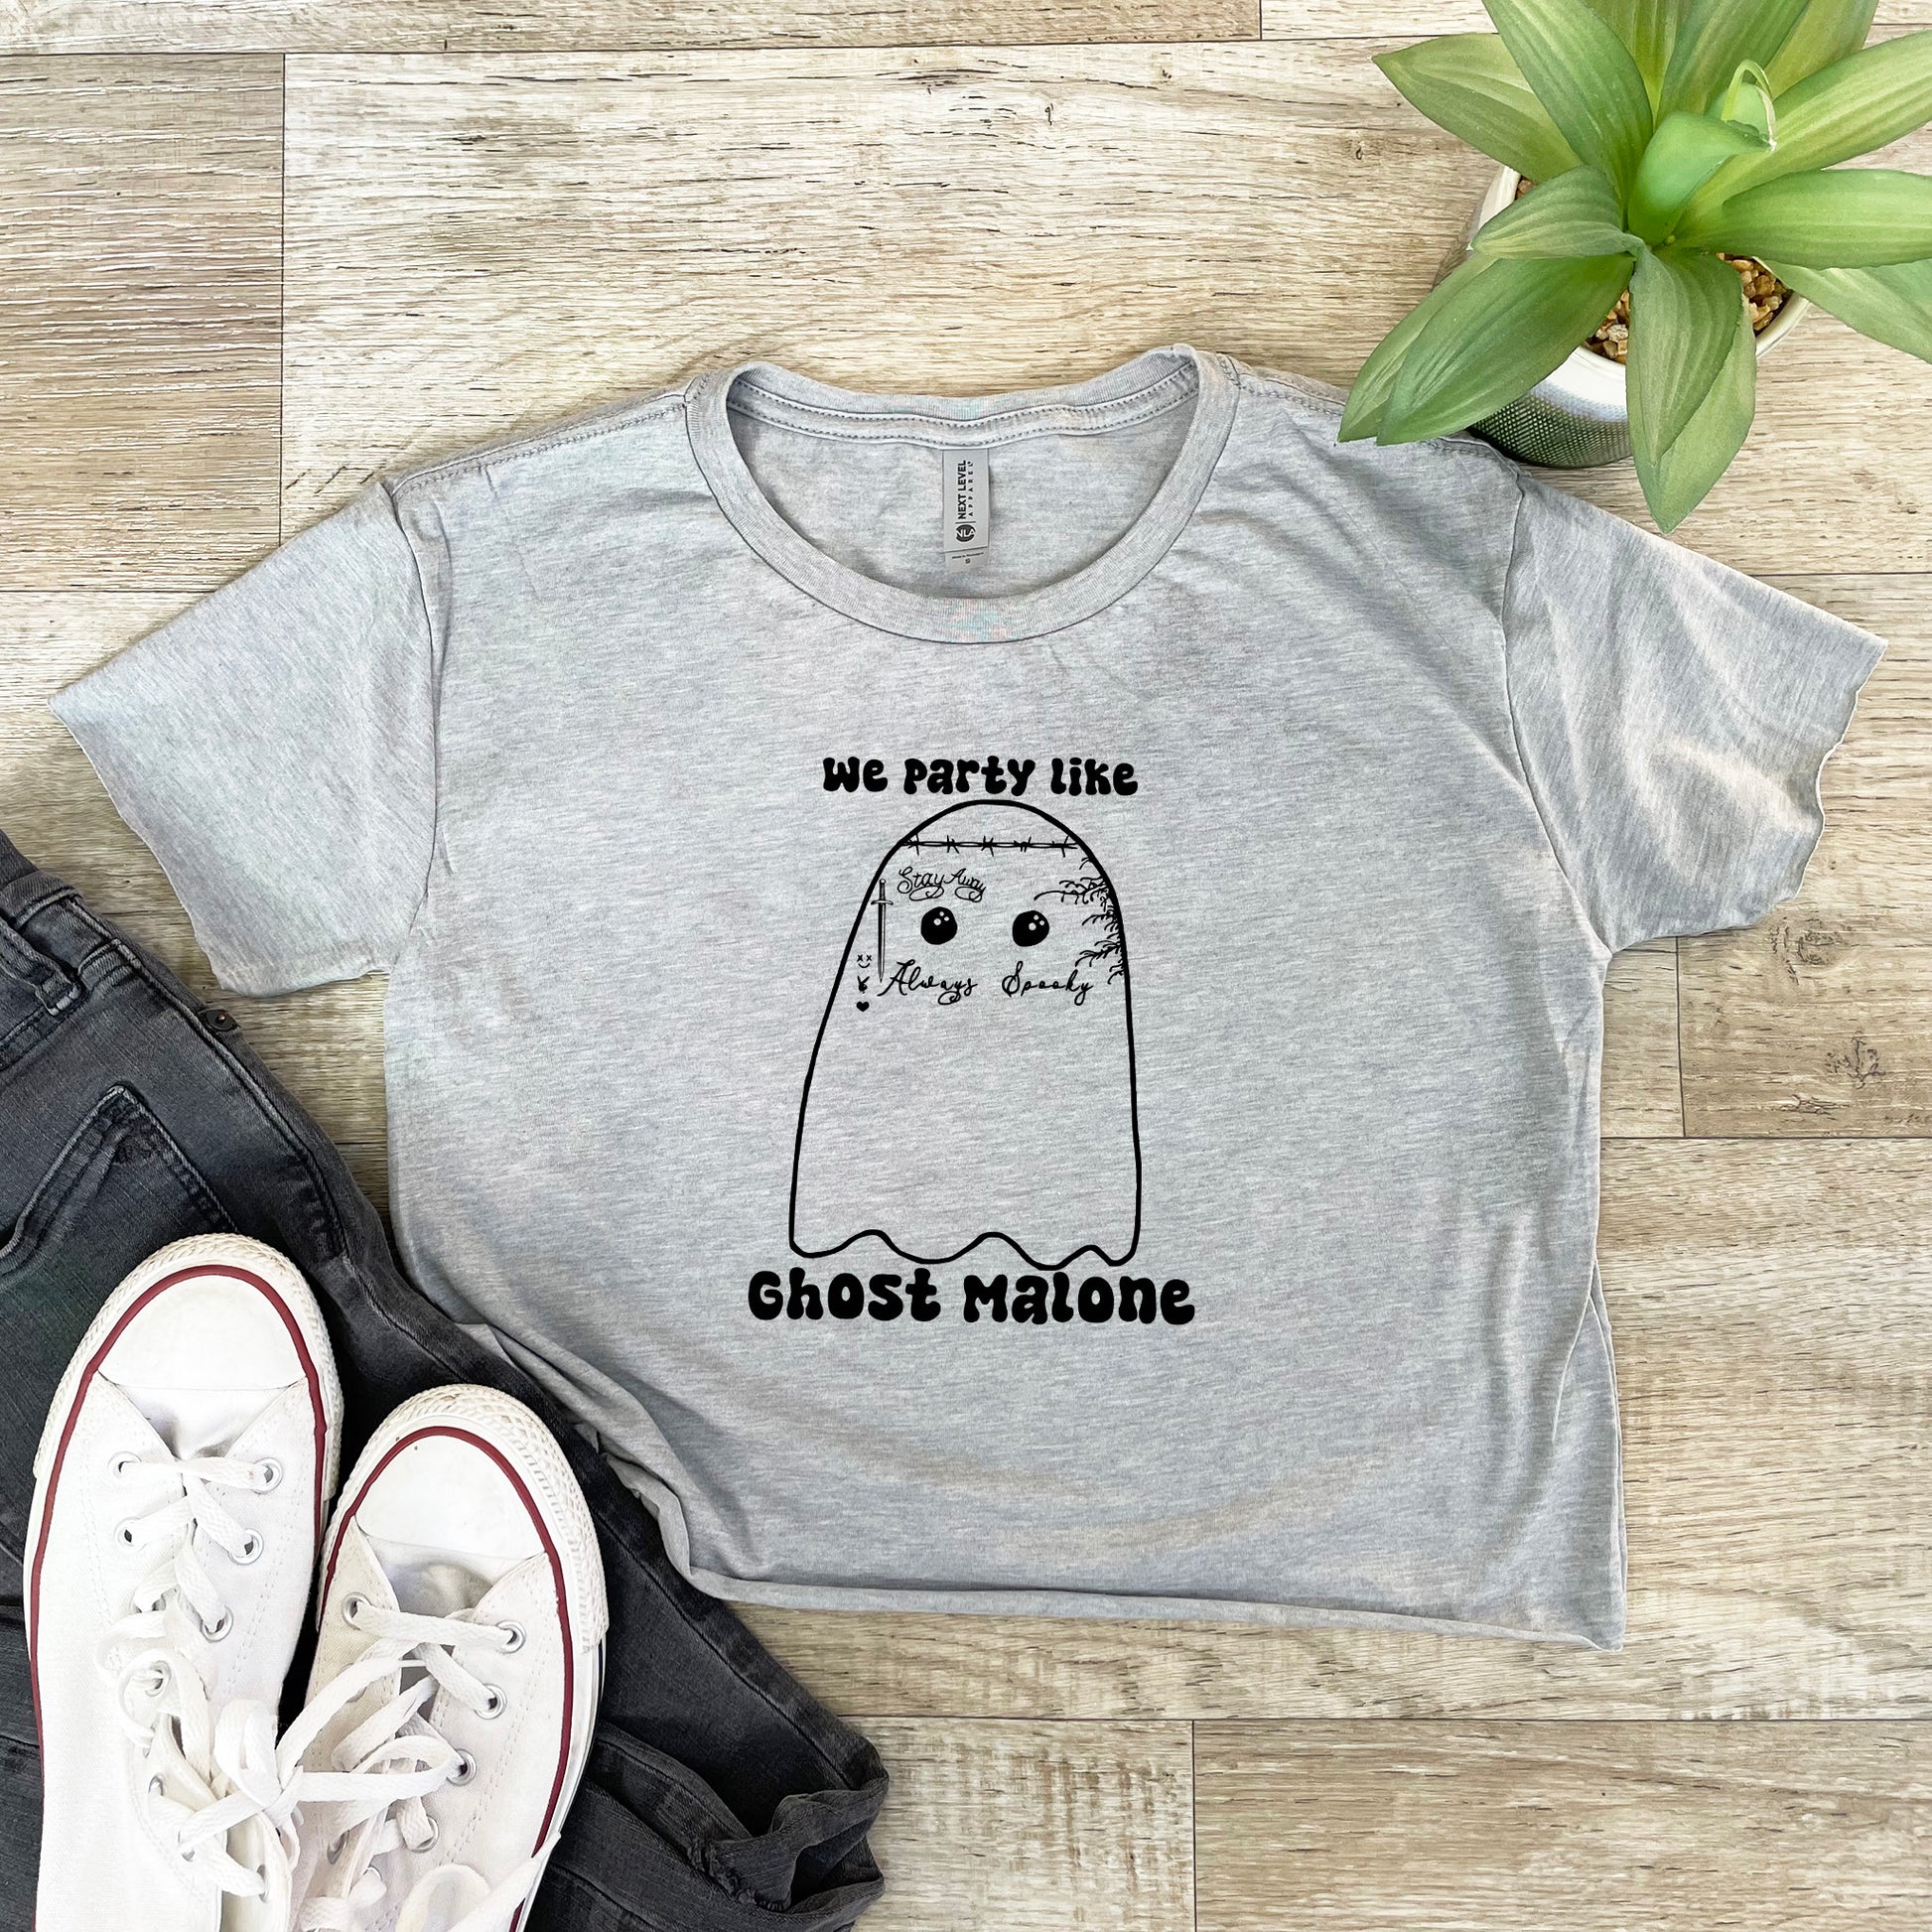 a t - shirt that says we party like a ghost